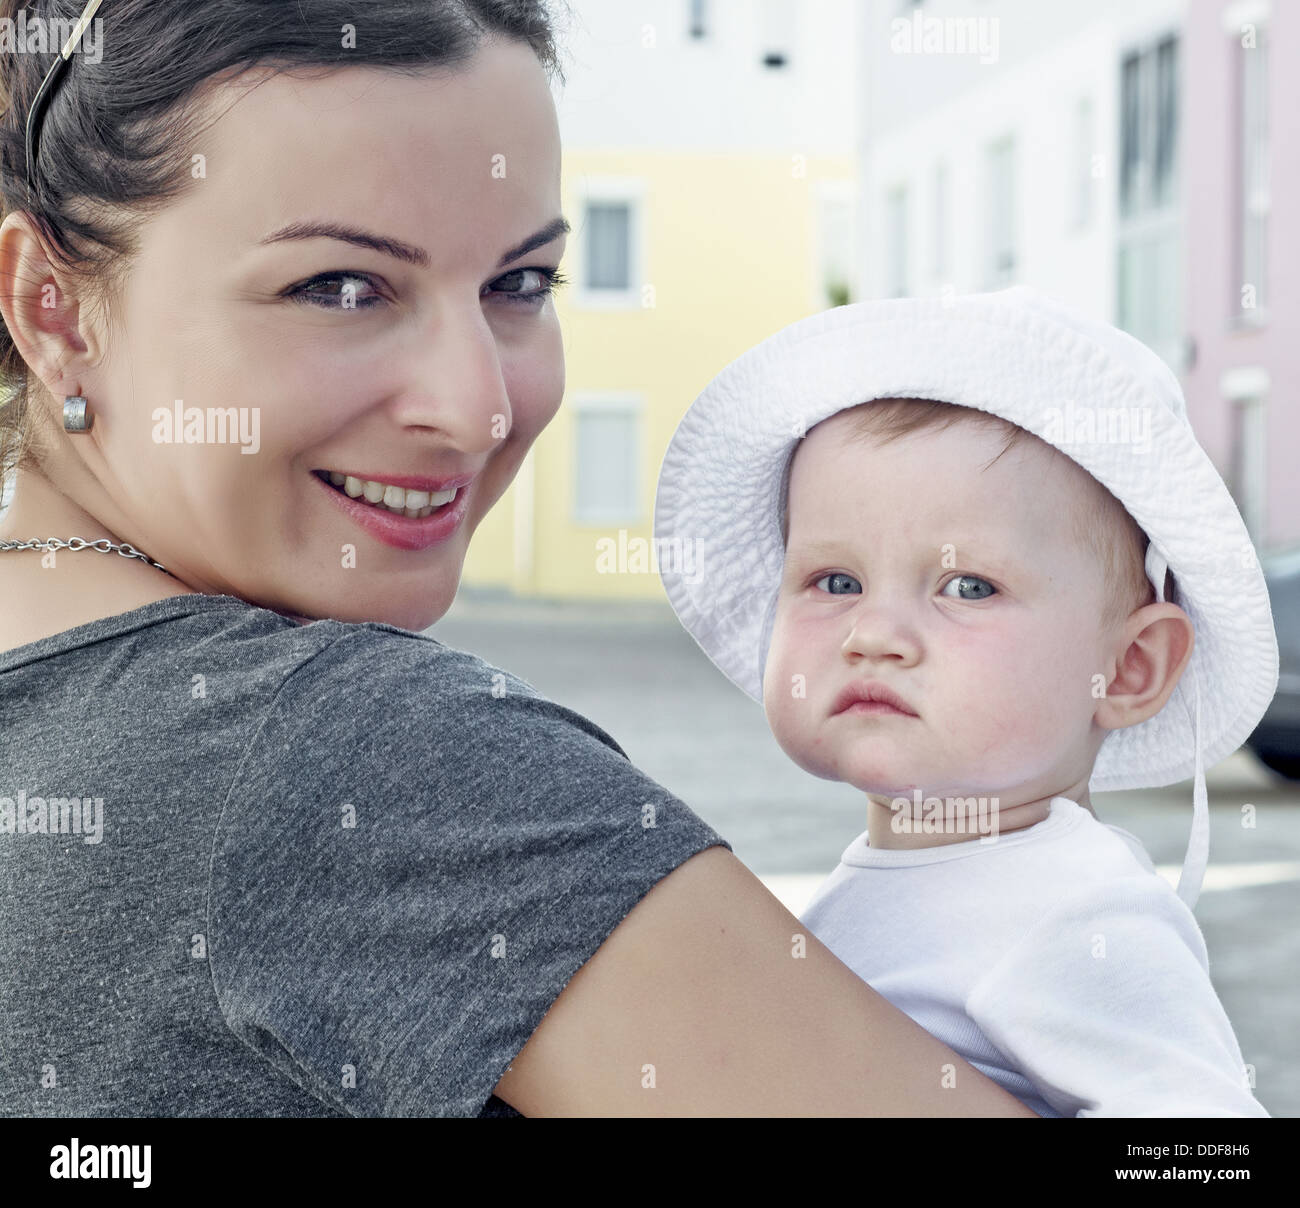 Caucasian baby girl with white hat and her mother. Stock Photo